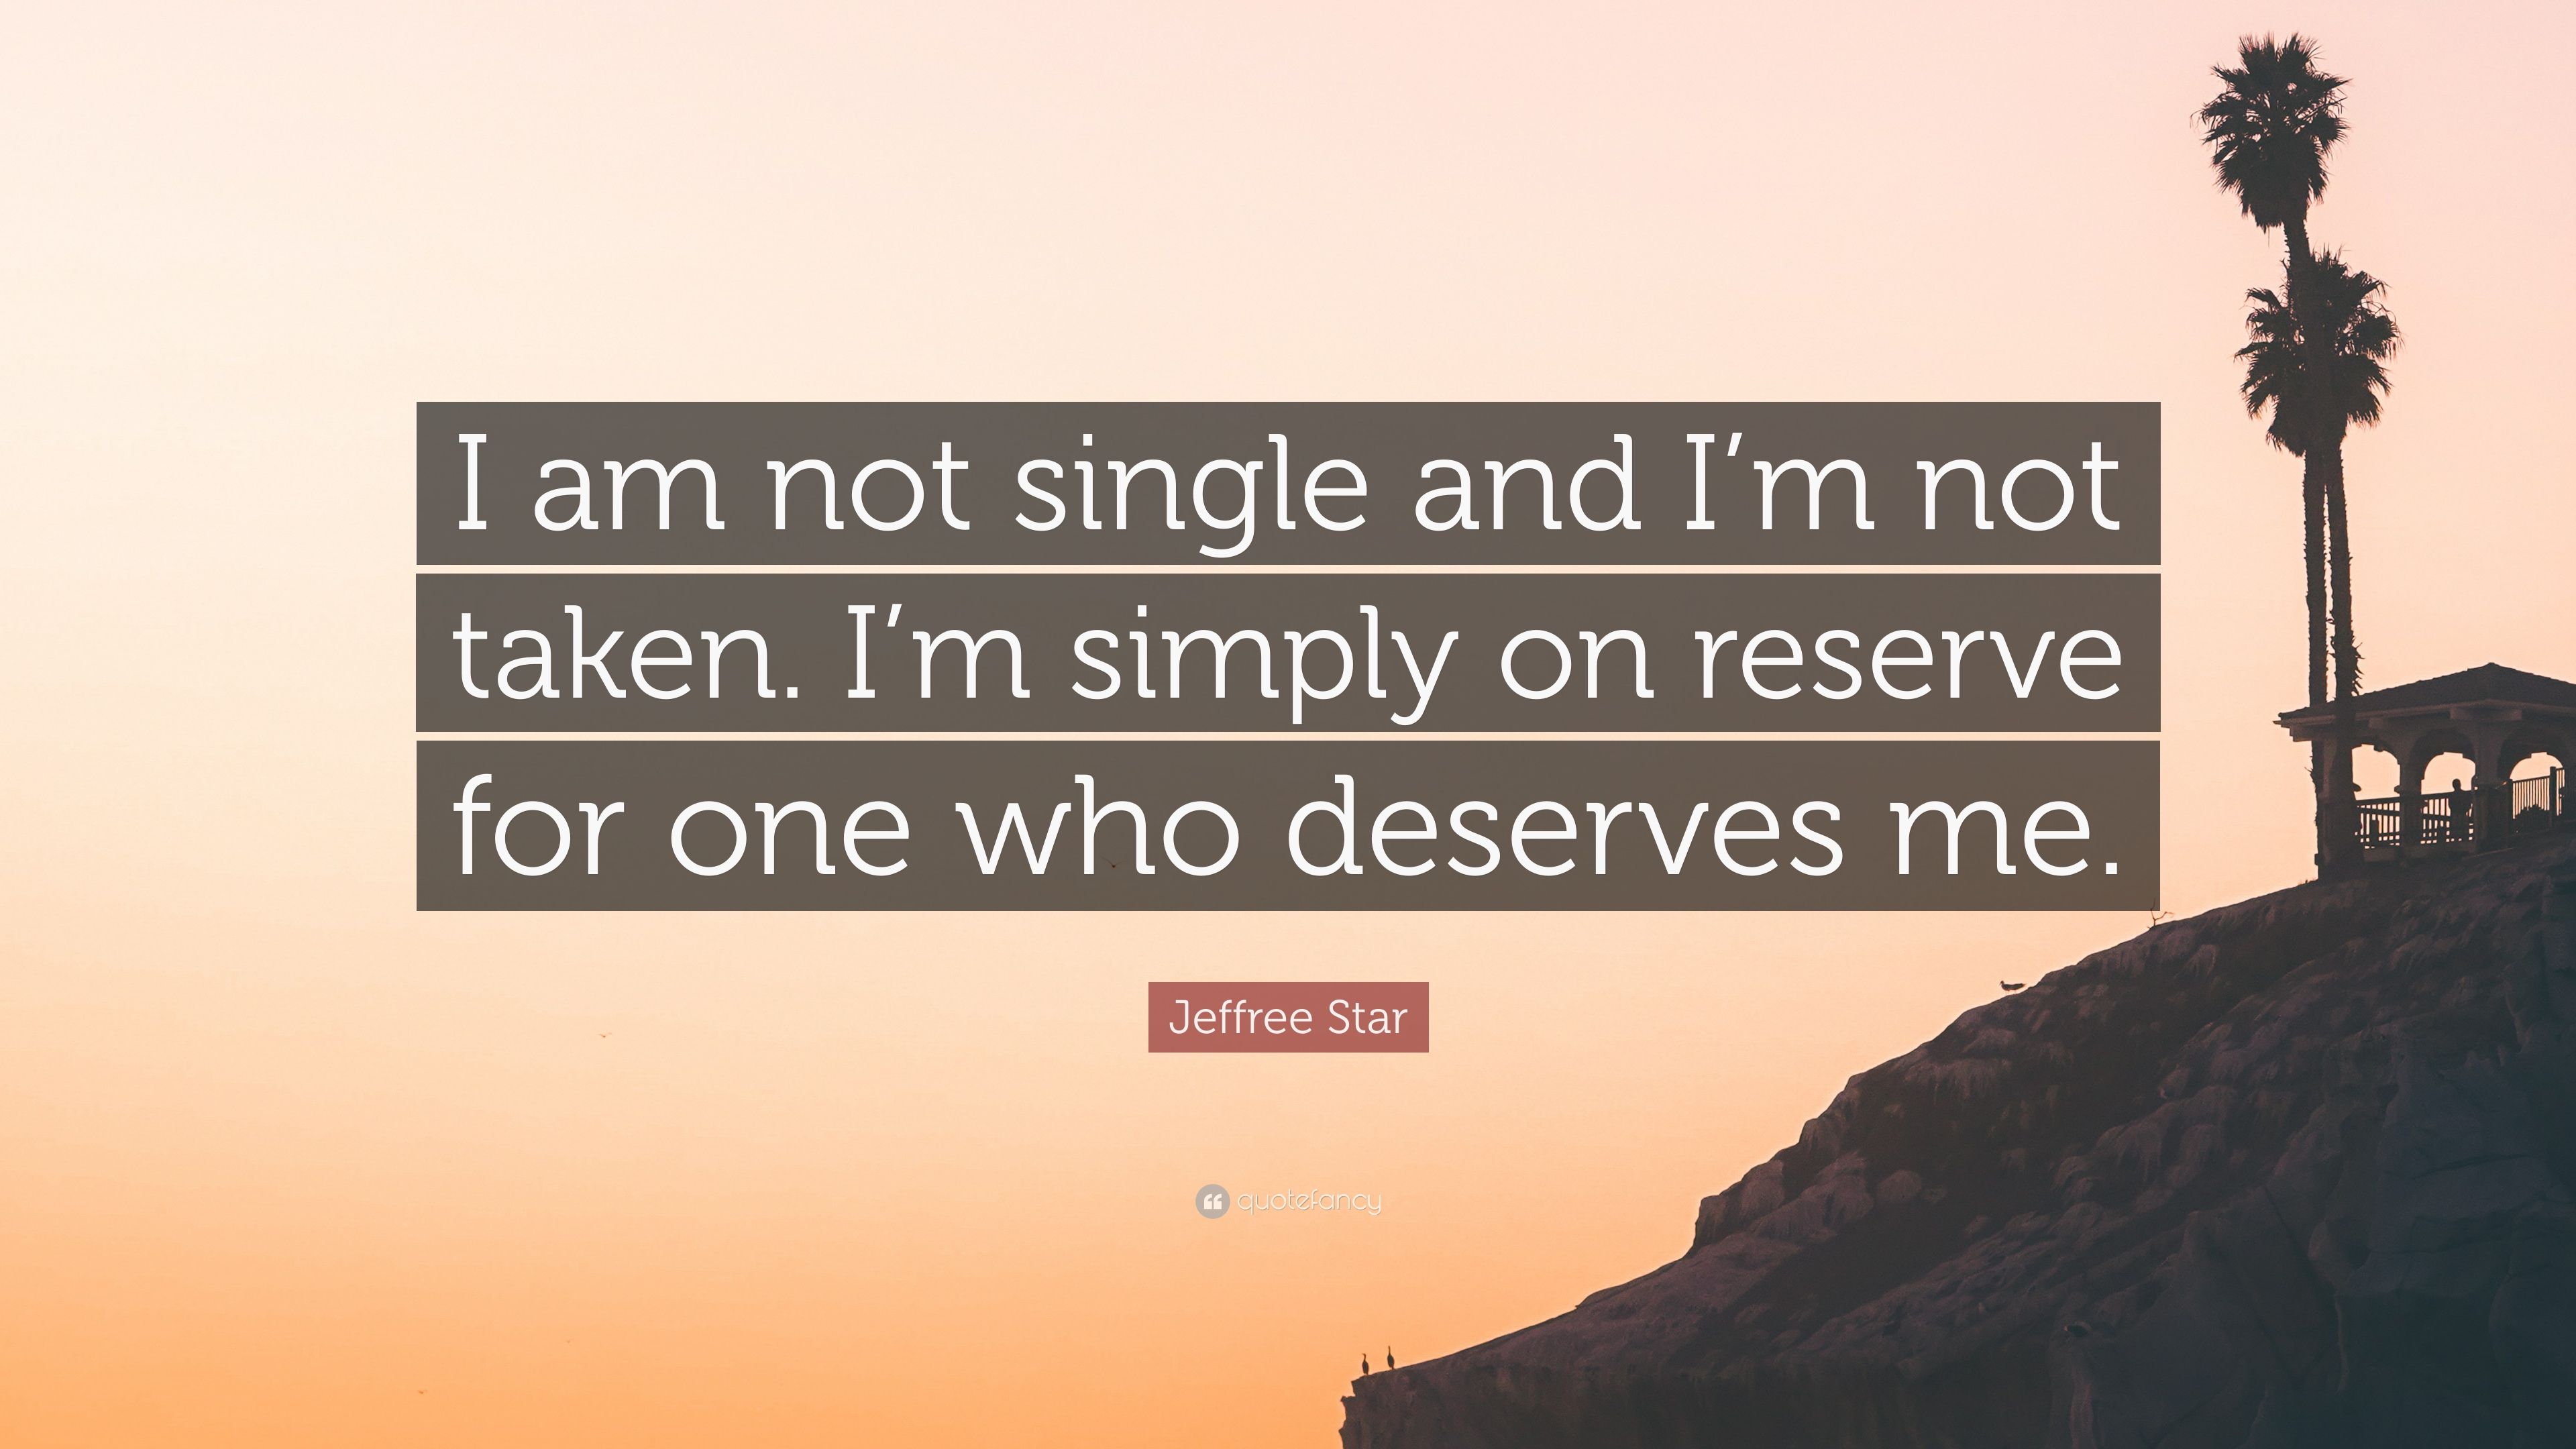 Jeffree Star Quote: “I am not single and I'm not taken. I'm simply on reserve for one who deserves me.” (7 wallpaper)